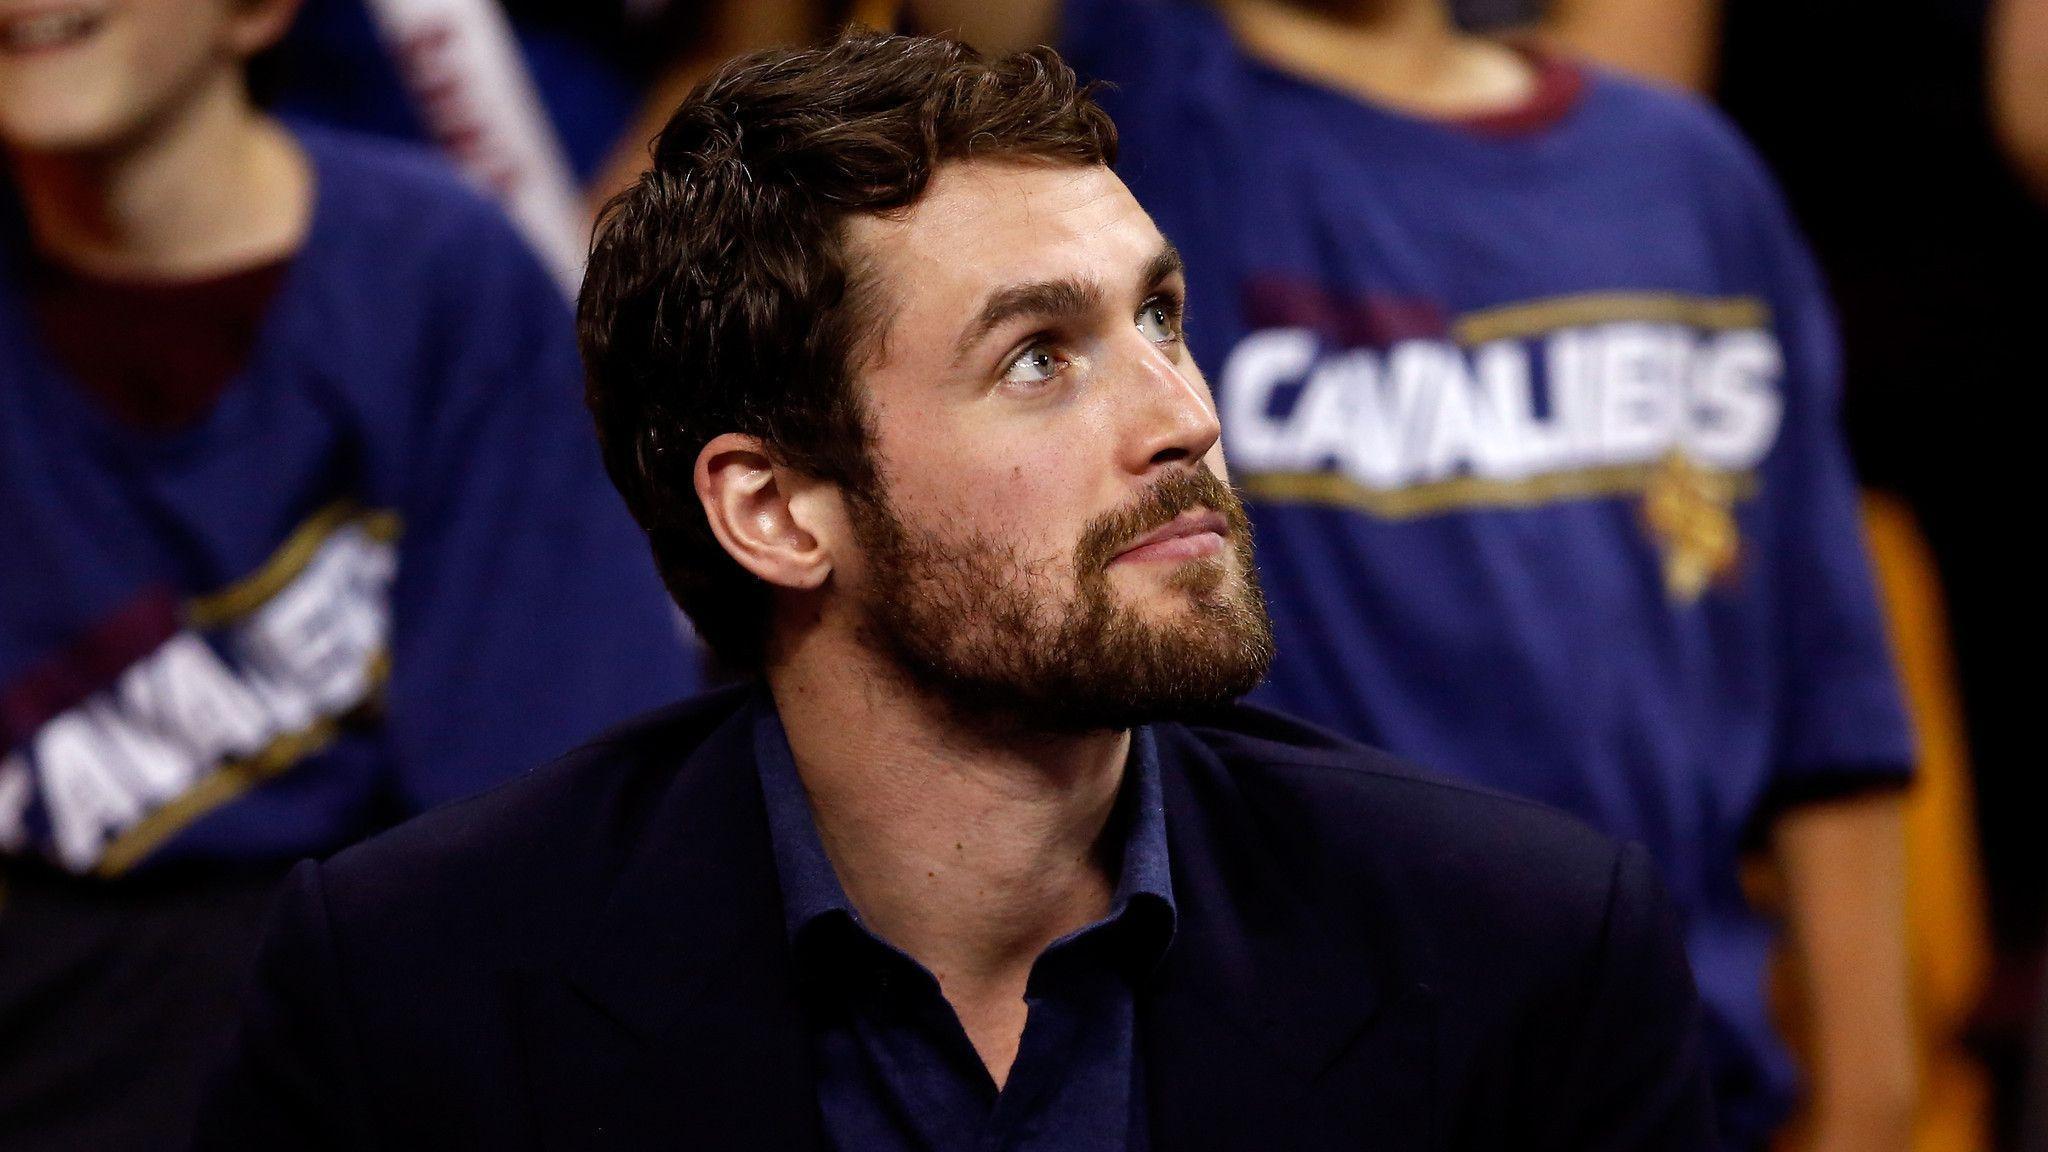 Kevin Love announces he will return to Cleveland Cavaliers